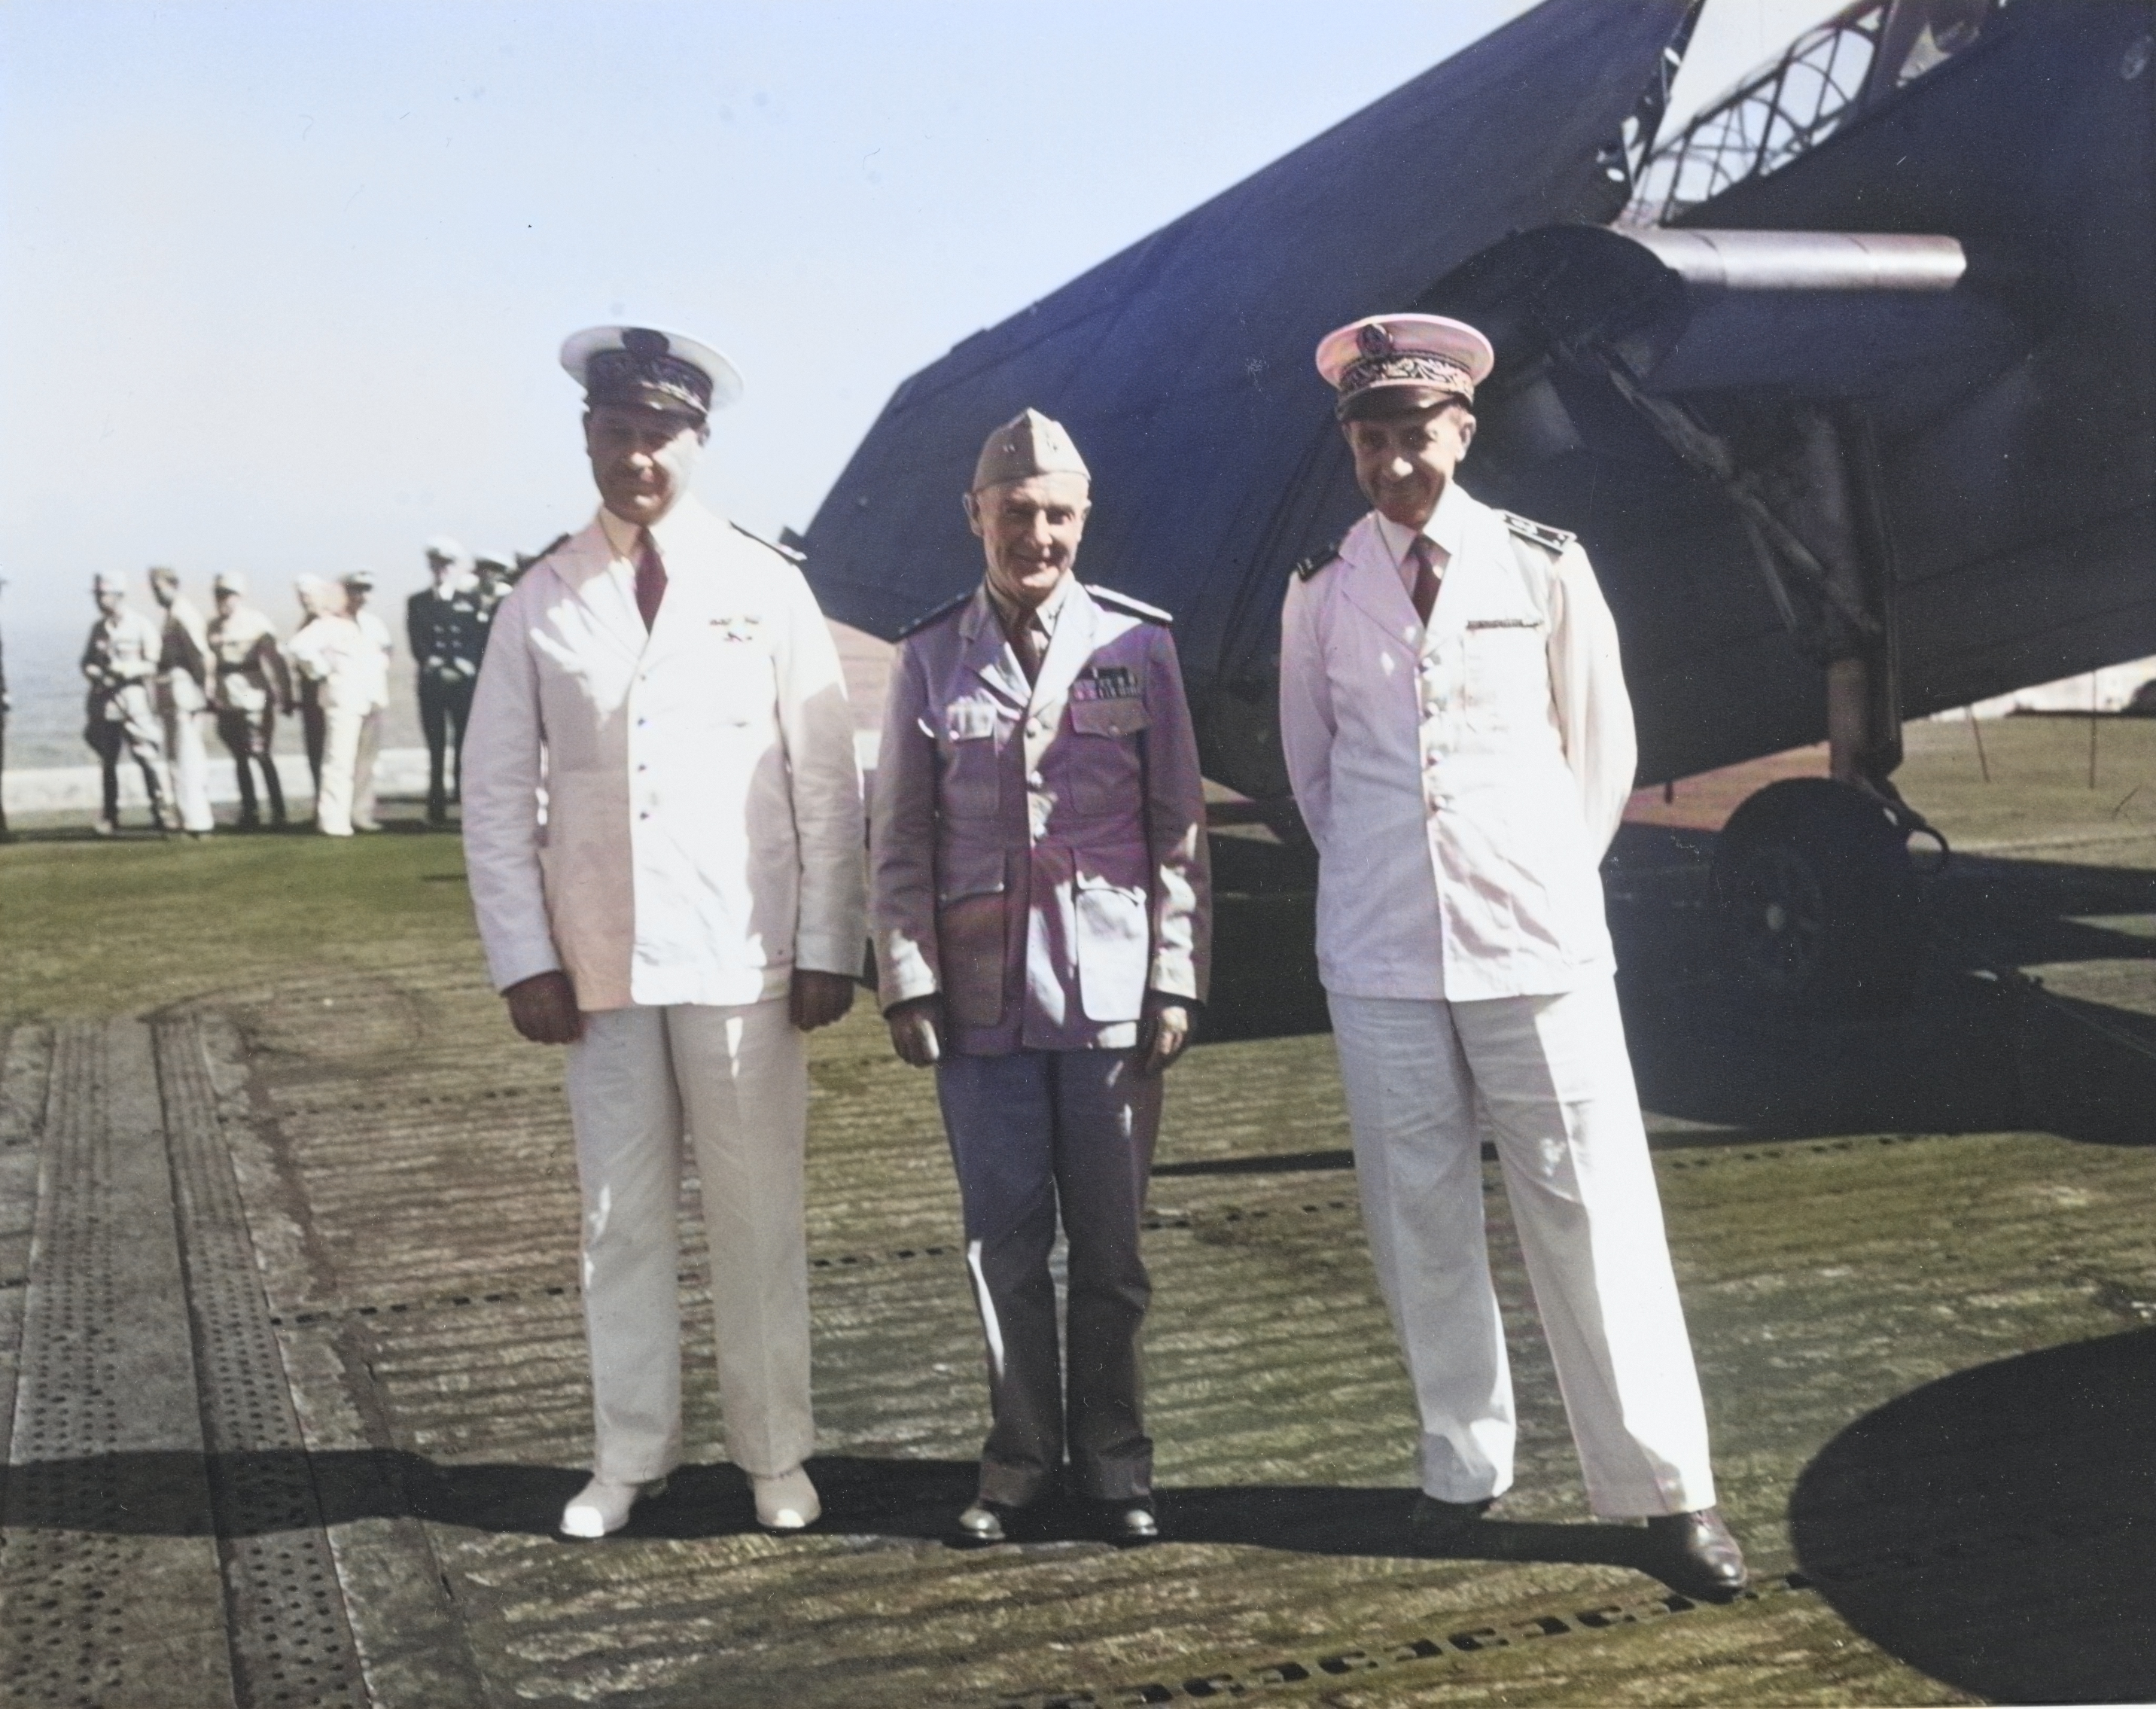 On the flight deck of USS Card in front of a TBF Avenger, US Navy Rear Admiral Frank Lowry (center) is flanked by two Rear Admirals of the French Navy, C.A. Ronarc’h (left) and Jacques Missoffe, Casablanca, 4 Jun 1943. [Colorized by WW2DB]